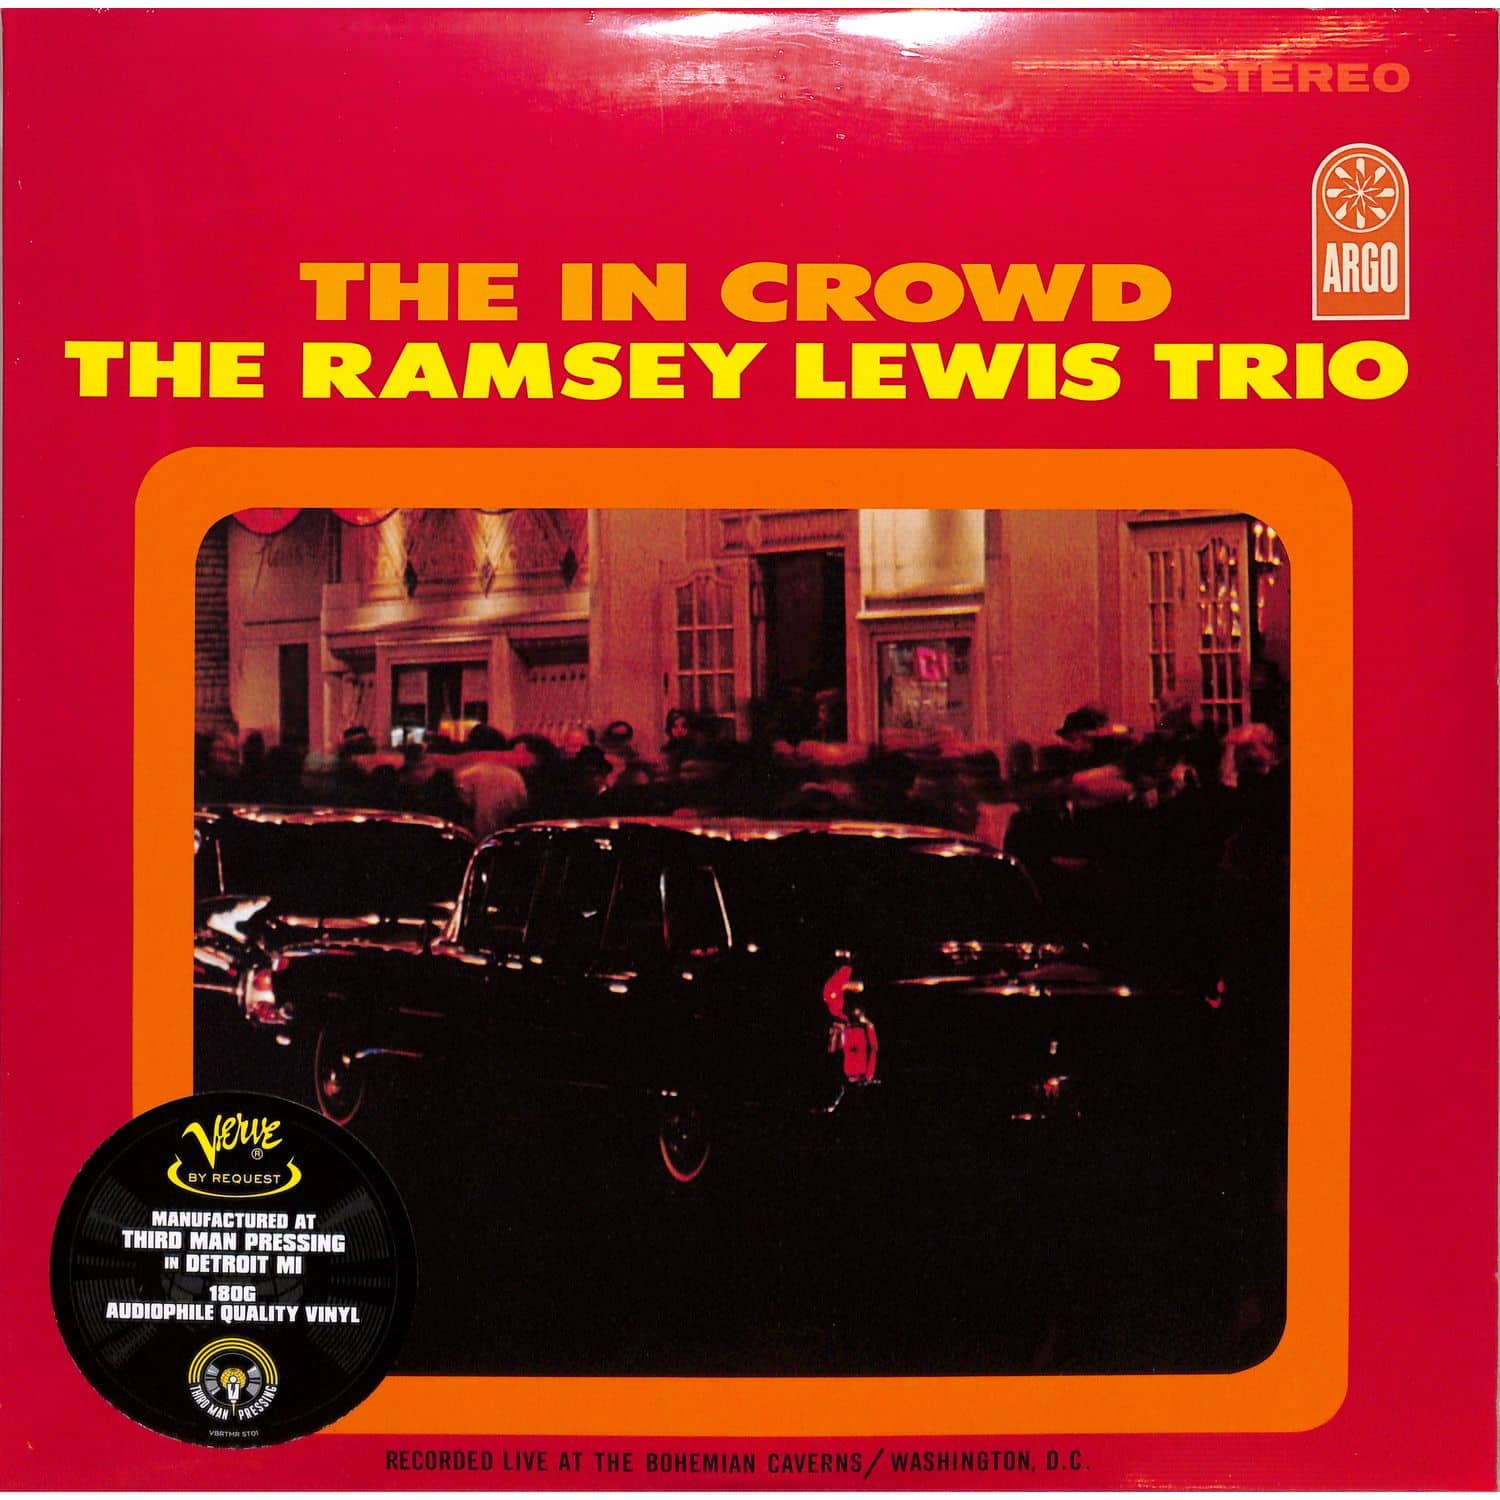 The Ramsey Lewis Trio - THE IN CROWD 